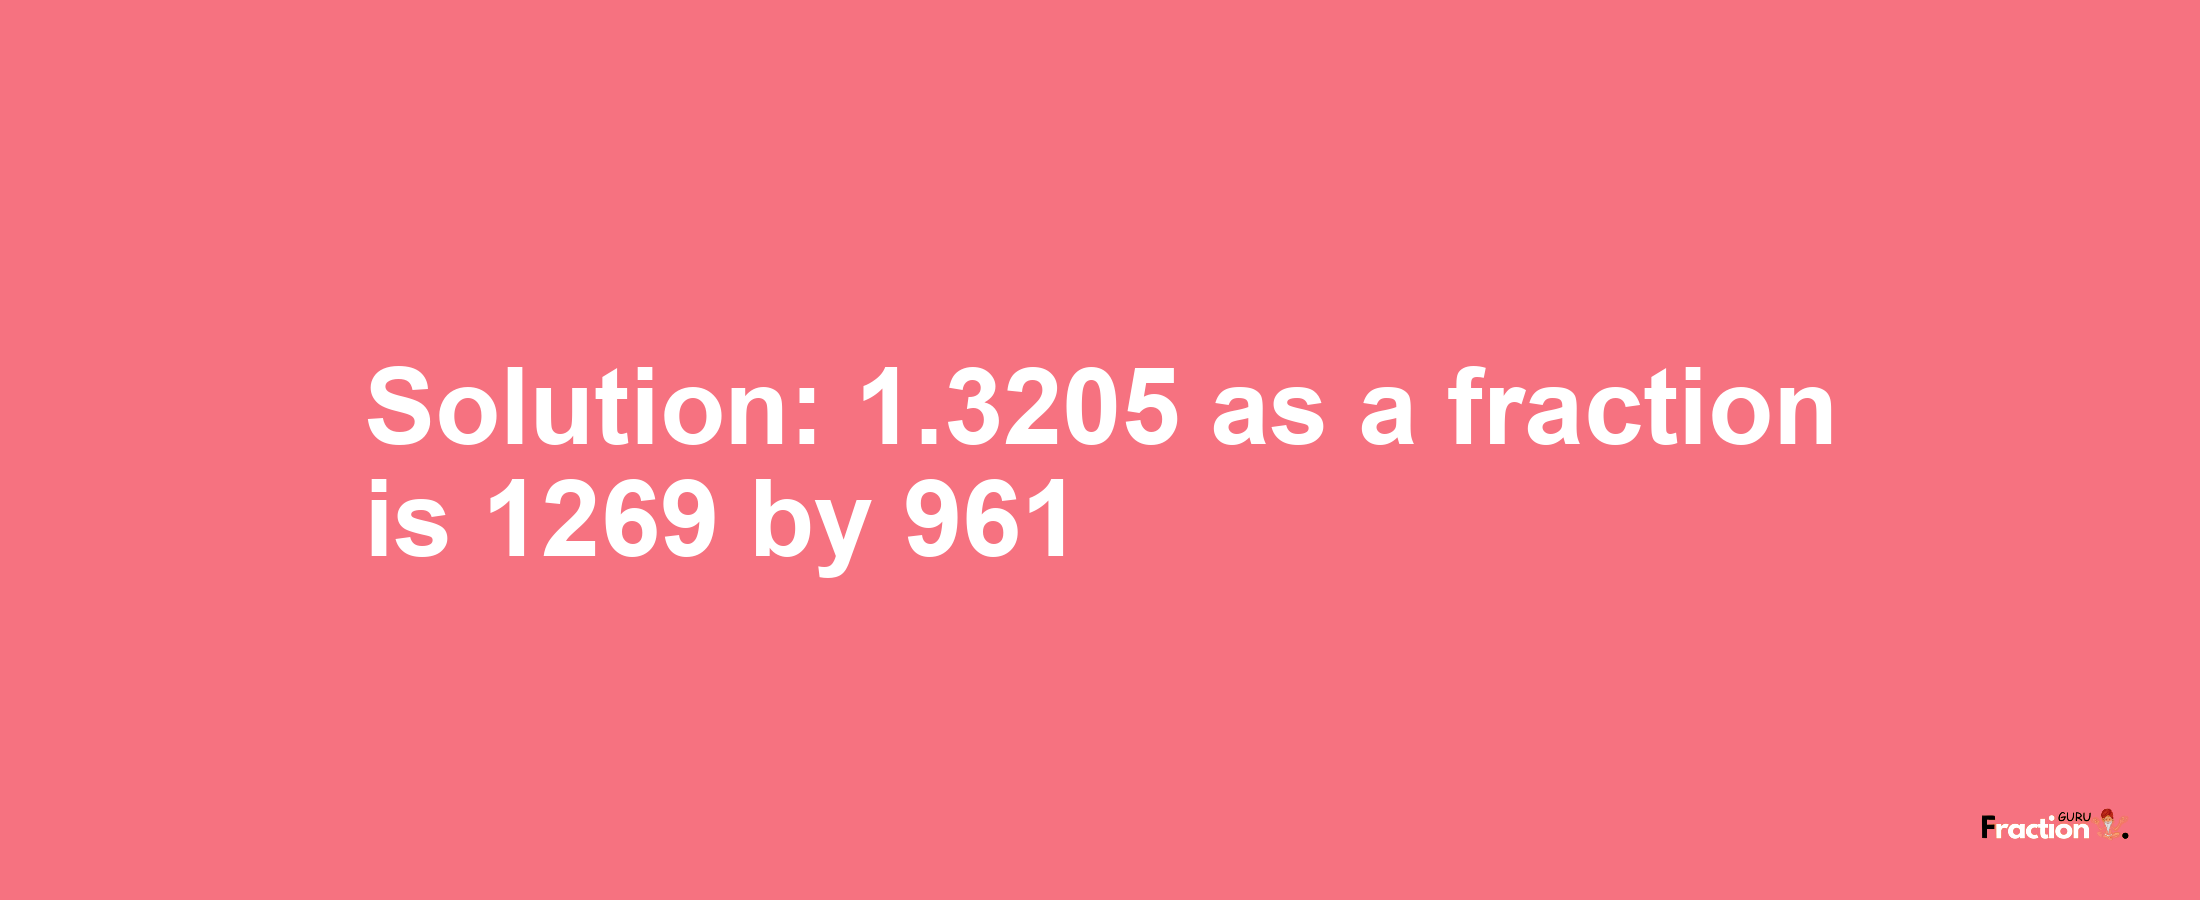 Solution:1.3205 as a fraction is 1269/961